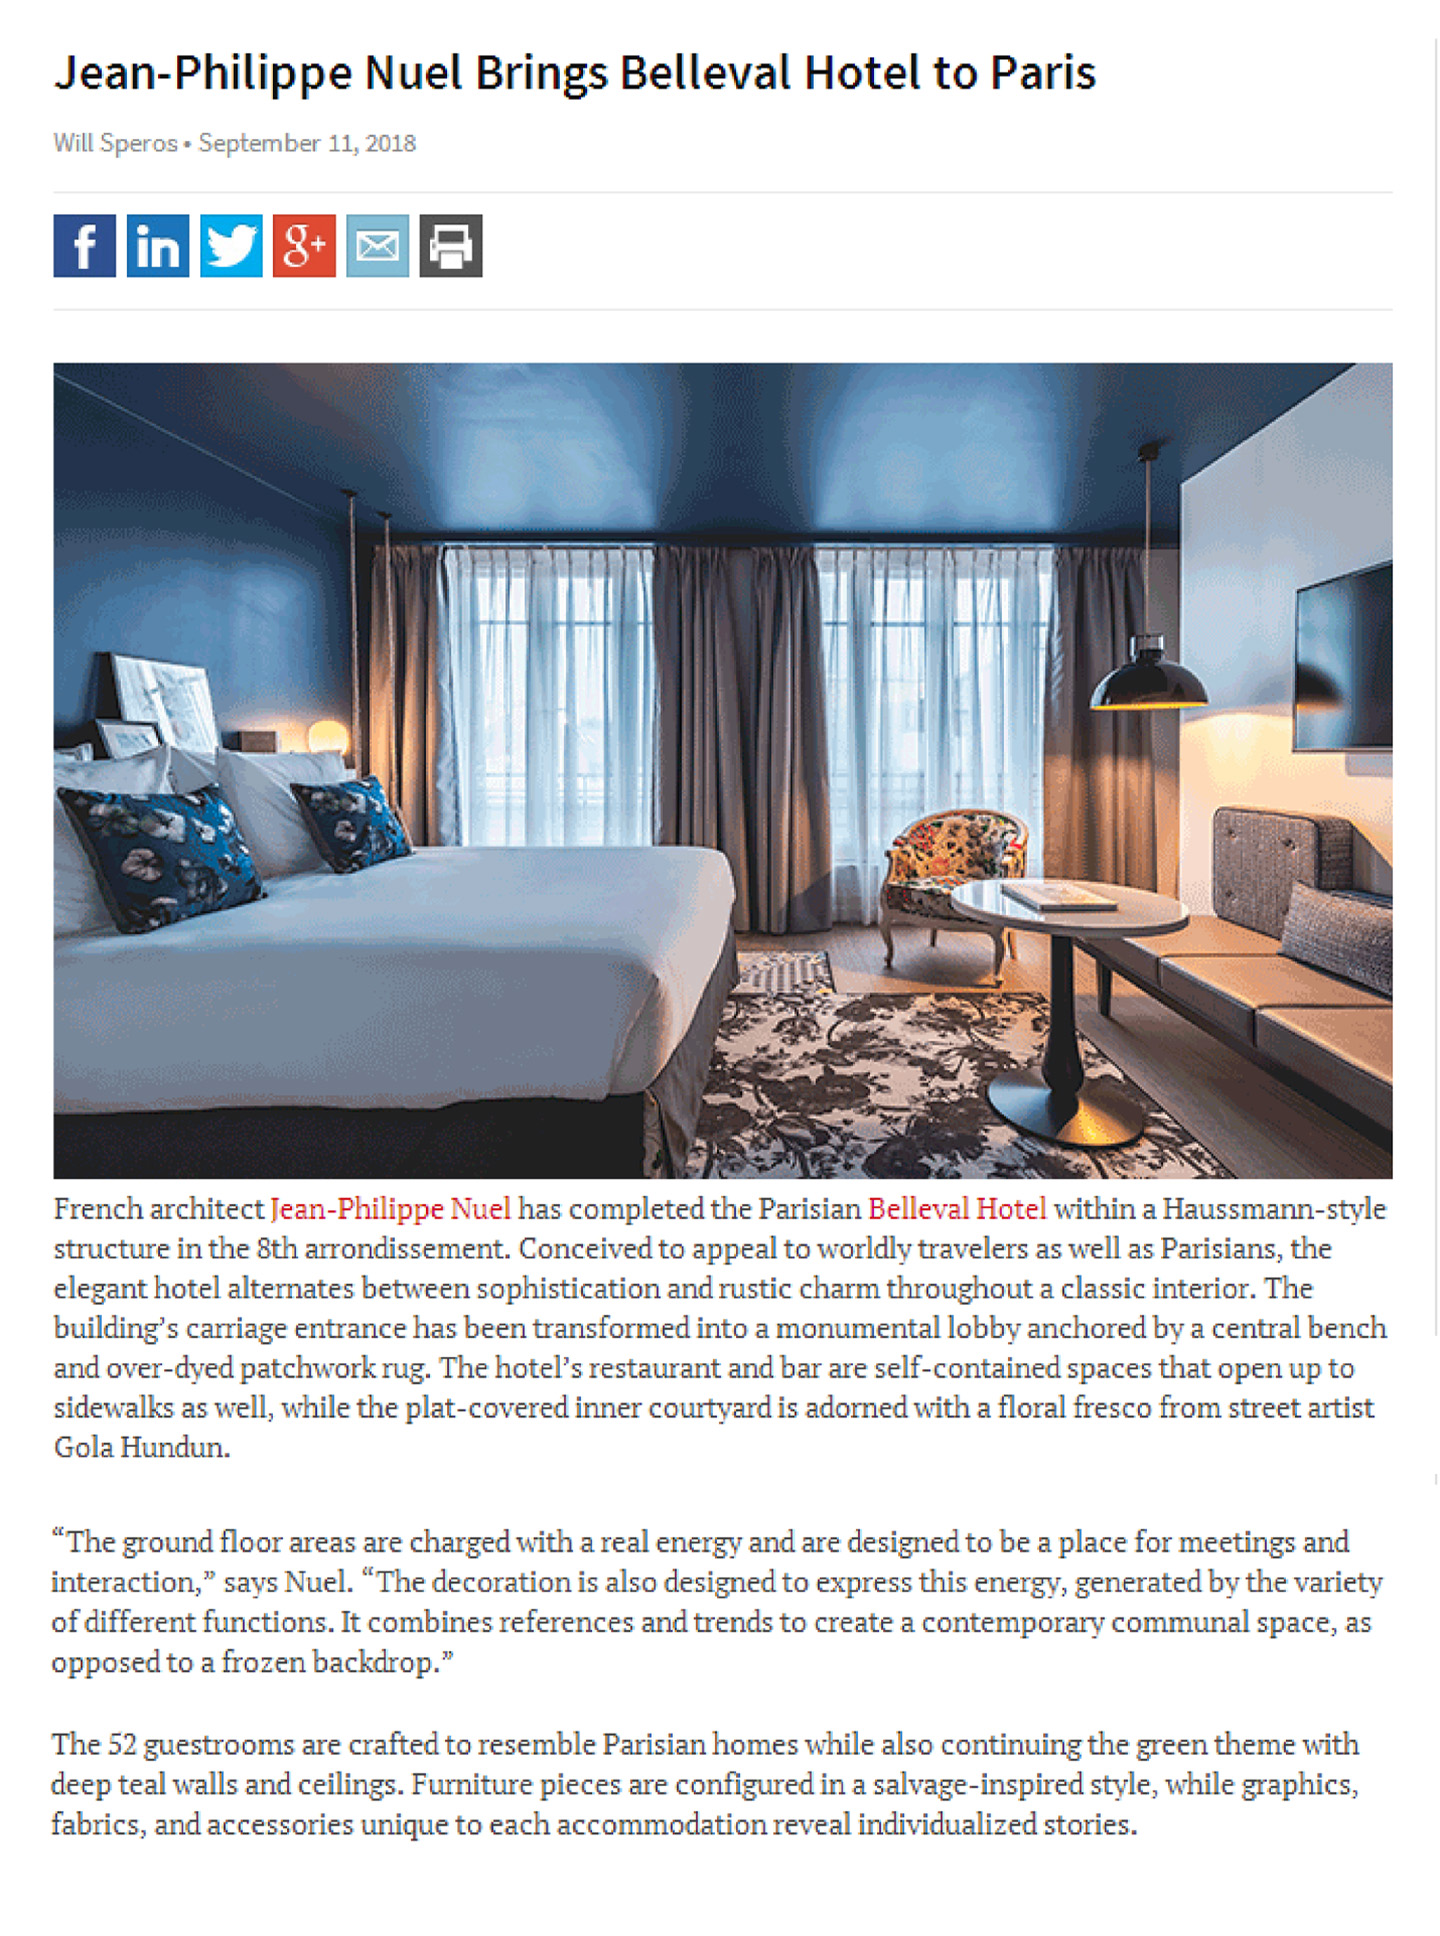 article on the belleval paris by the interior design studio jean-philippe nuel in hospitality design magazine, hotel lifestyle with a botanical and floral decoration